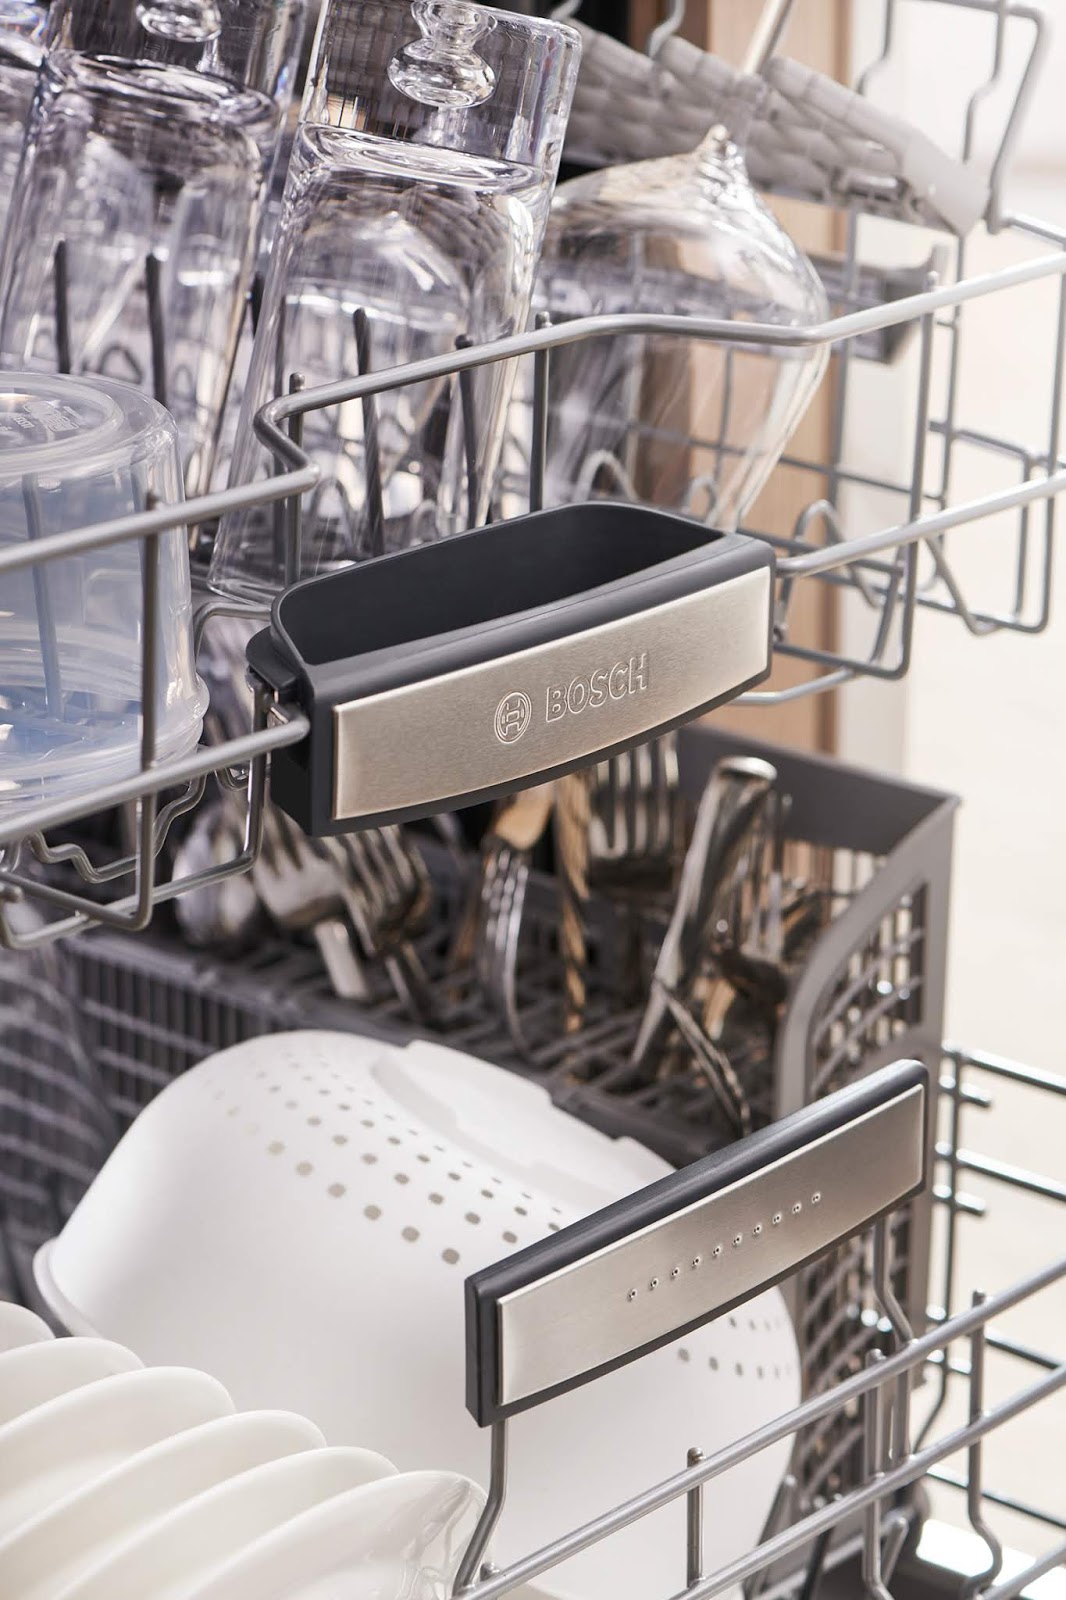 Introducing the Bosch 800 Series Dishwasher with Crystal Dry from Best